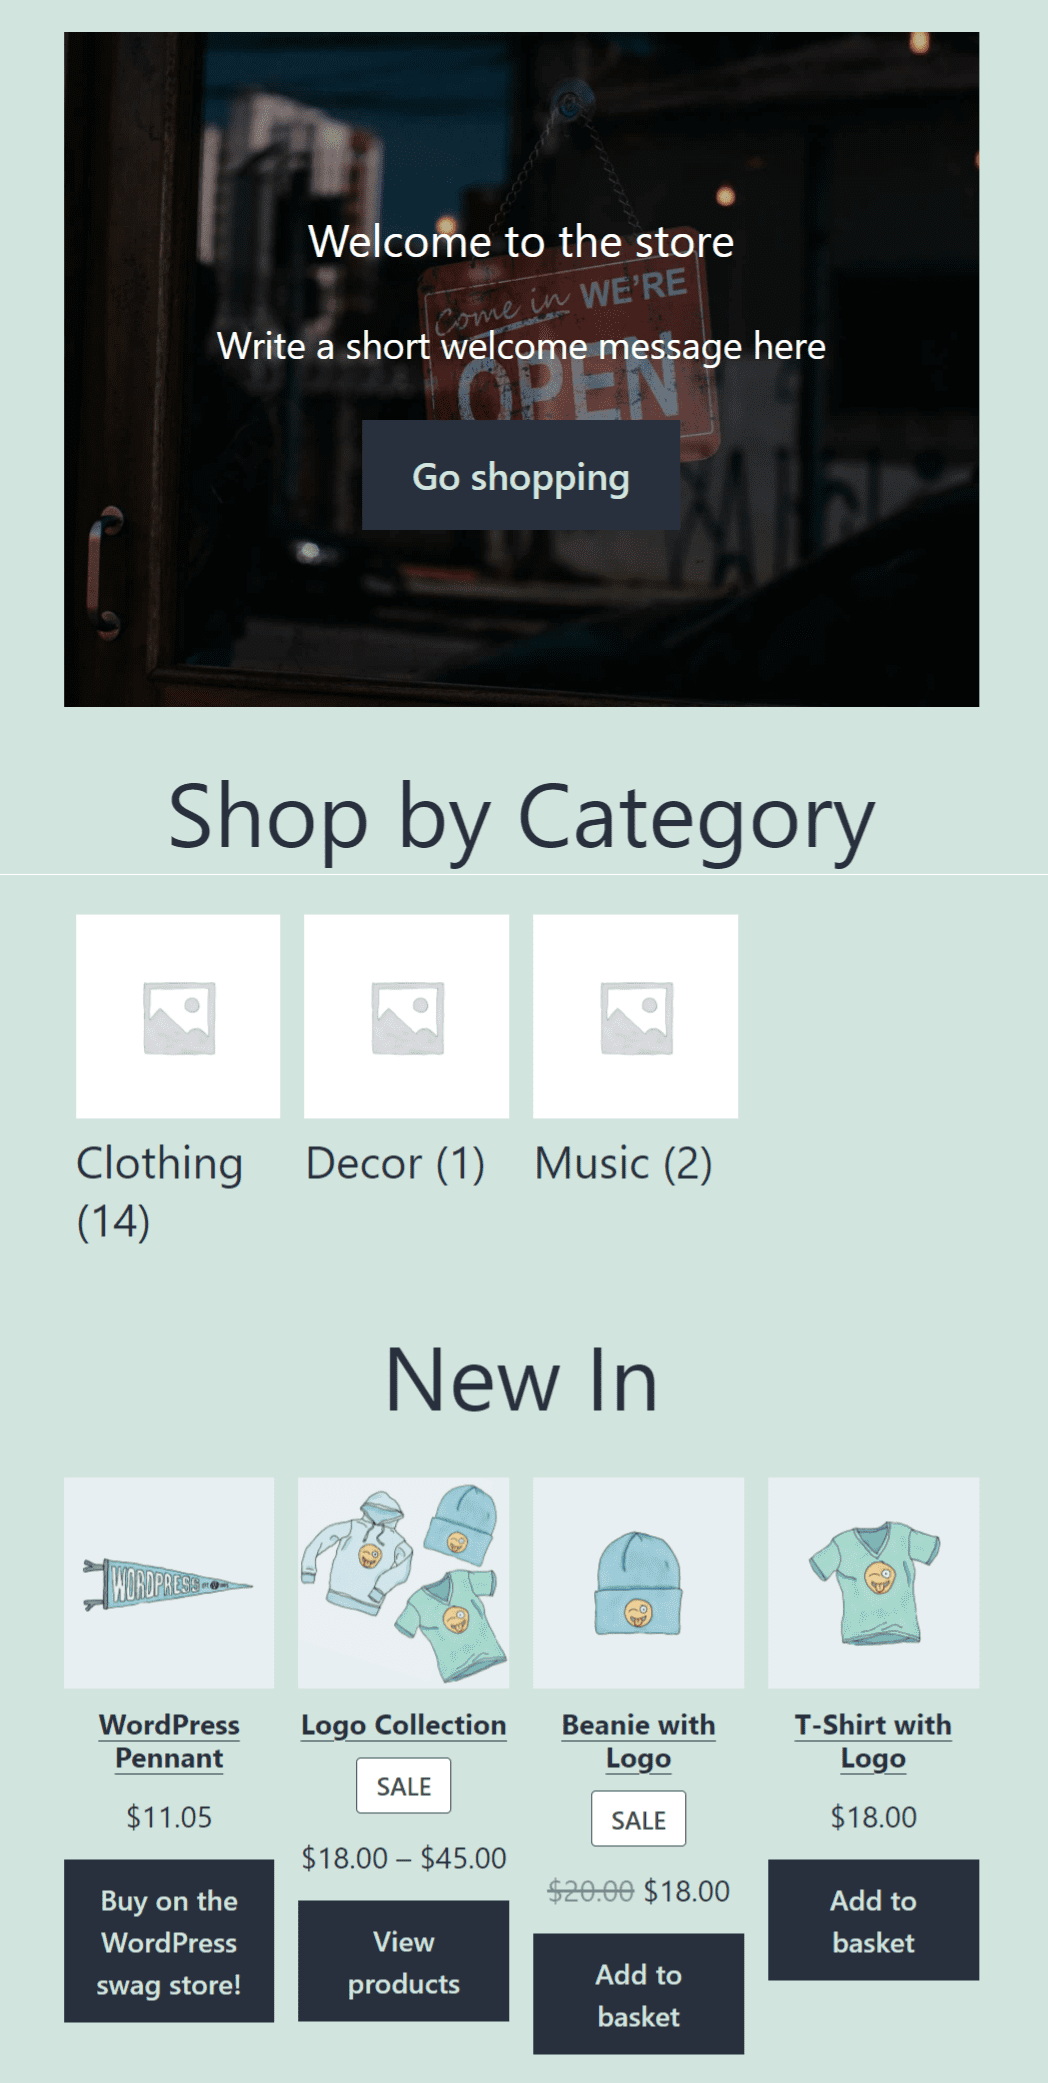 Example of a WooCommerce homepage